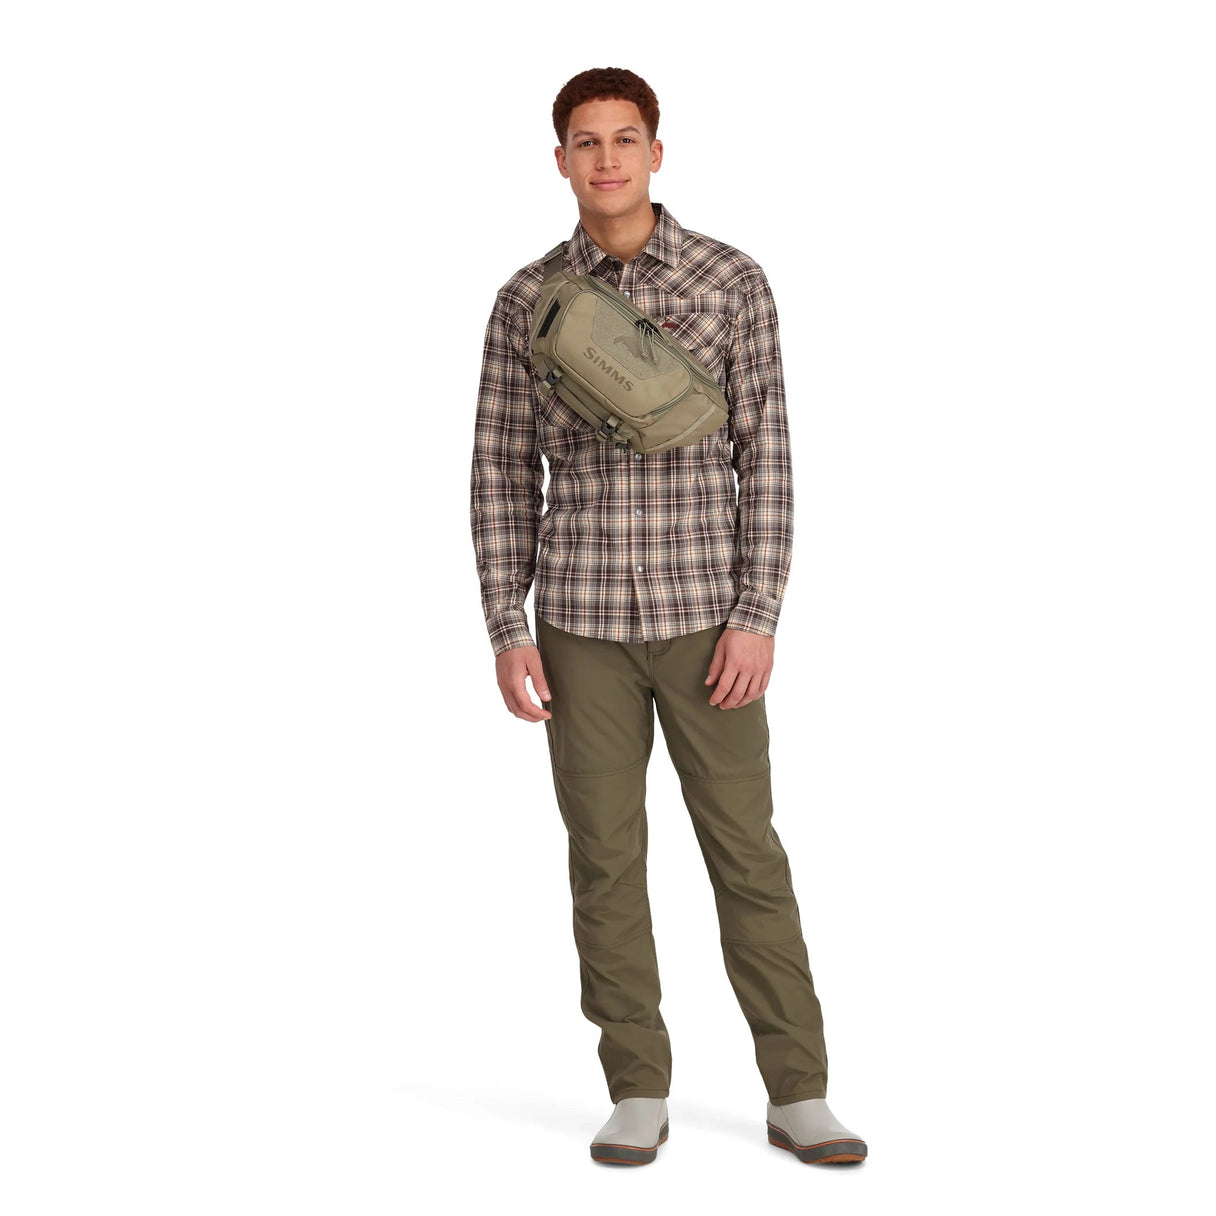 Simms Tributary Hip Pack - Regiment Camo Olive Drab